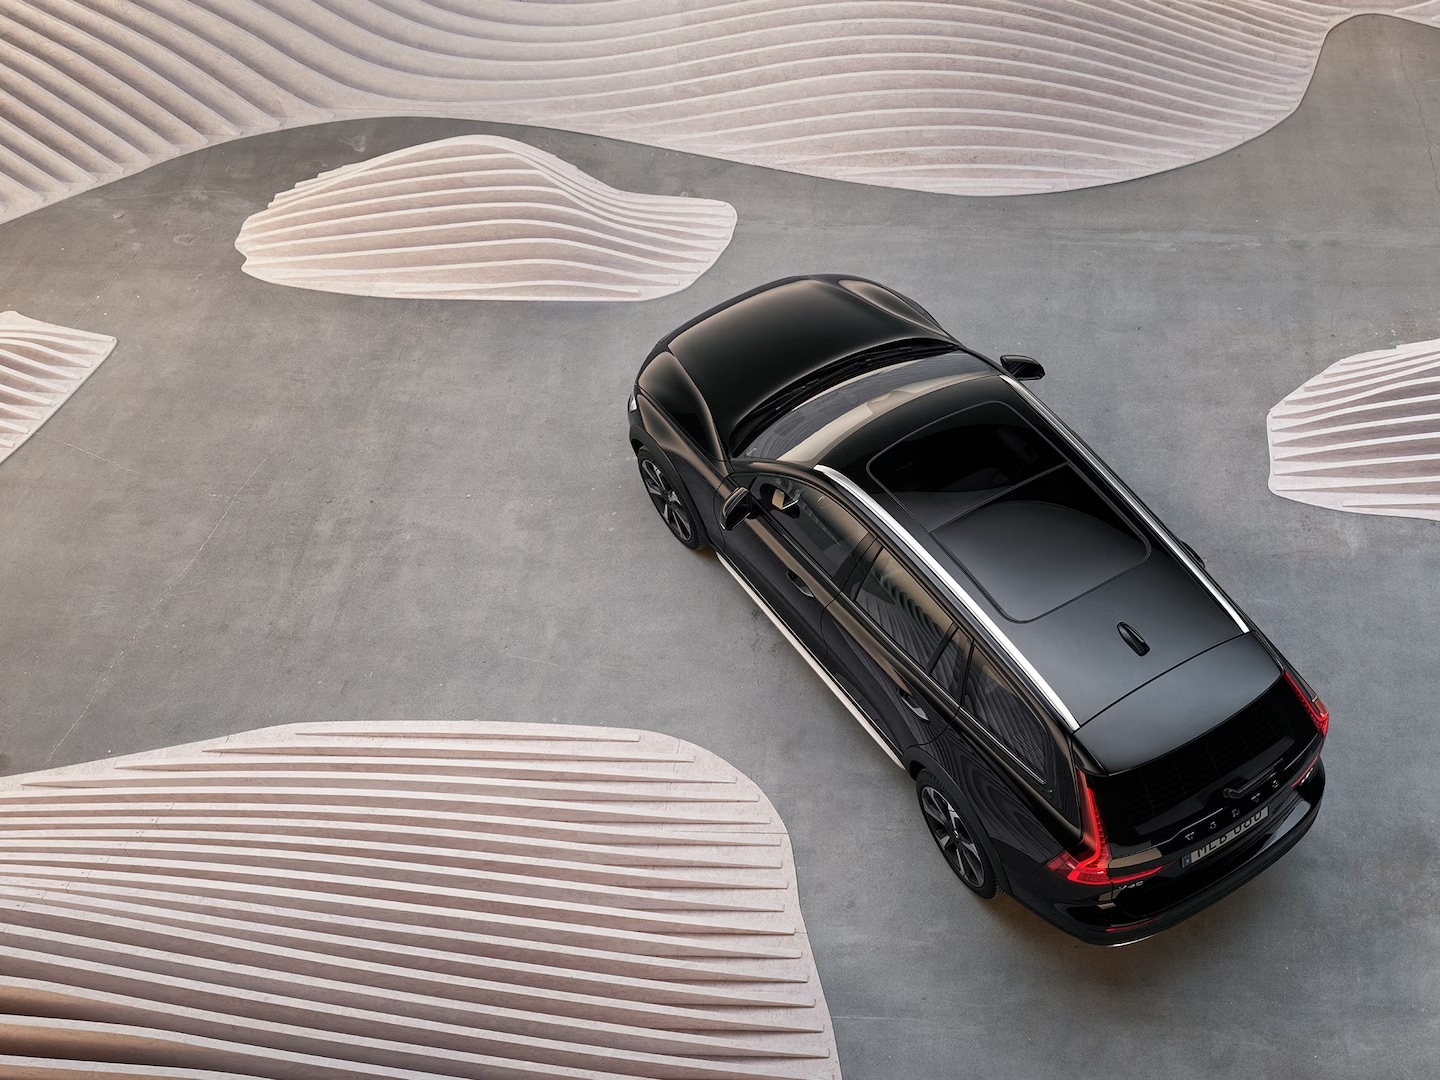 Exterior of the Volvo V60 Cross Country seen from above.